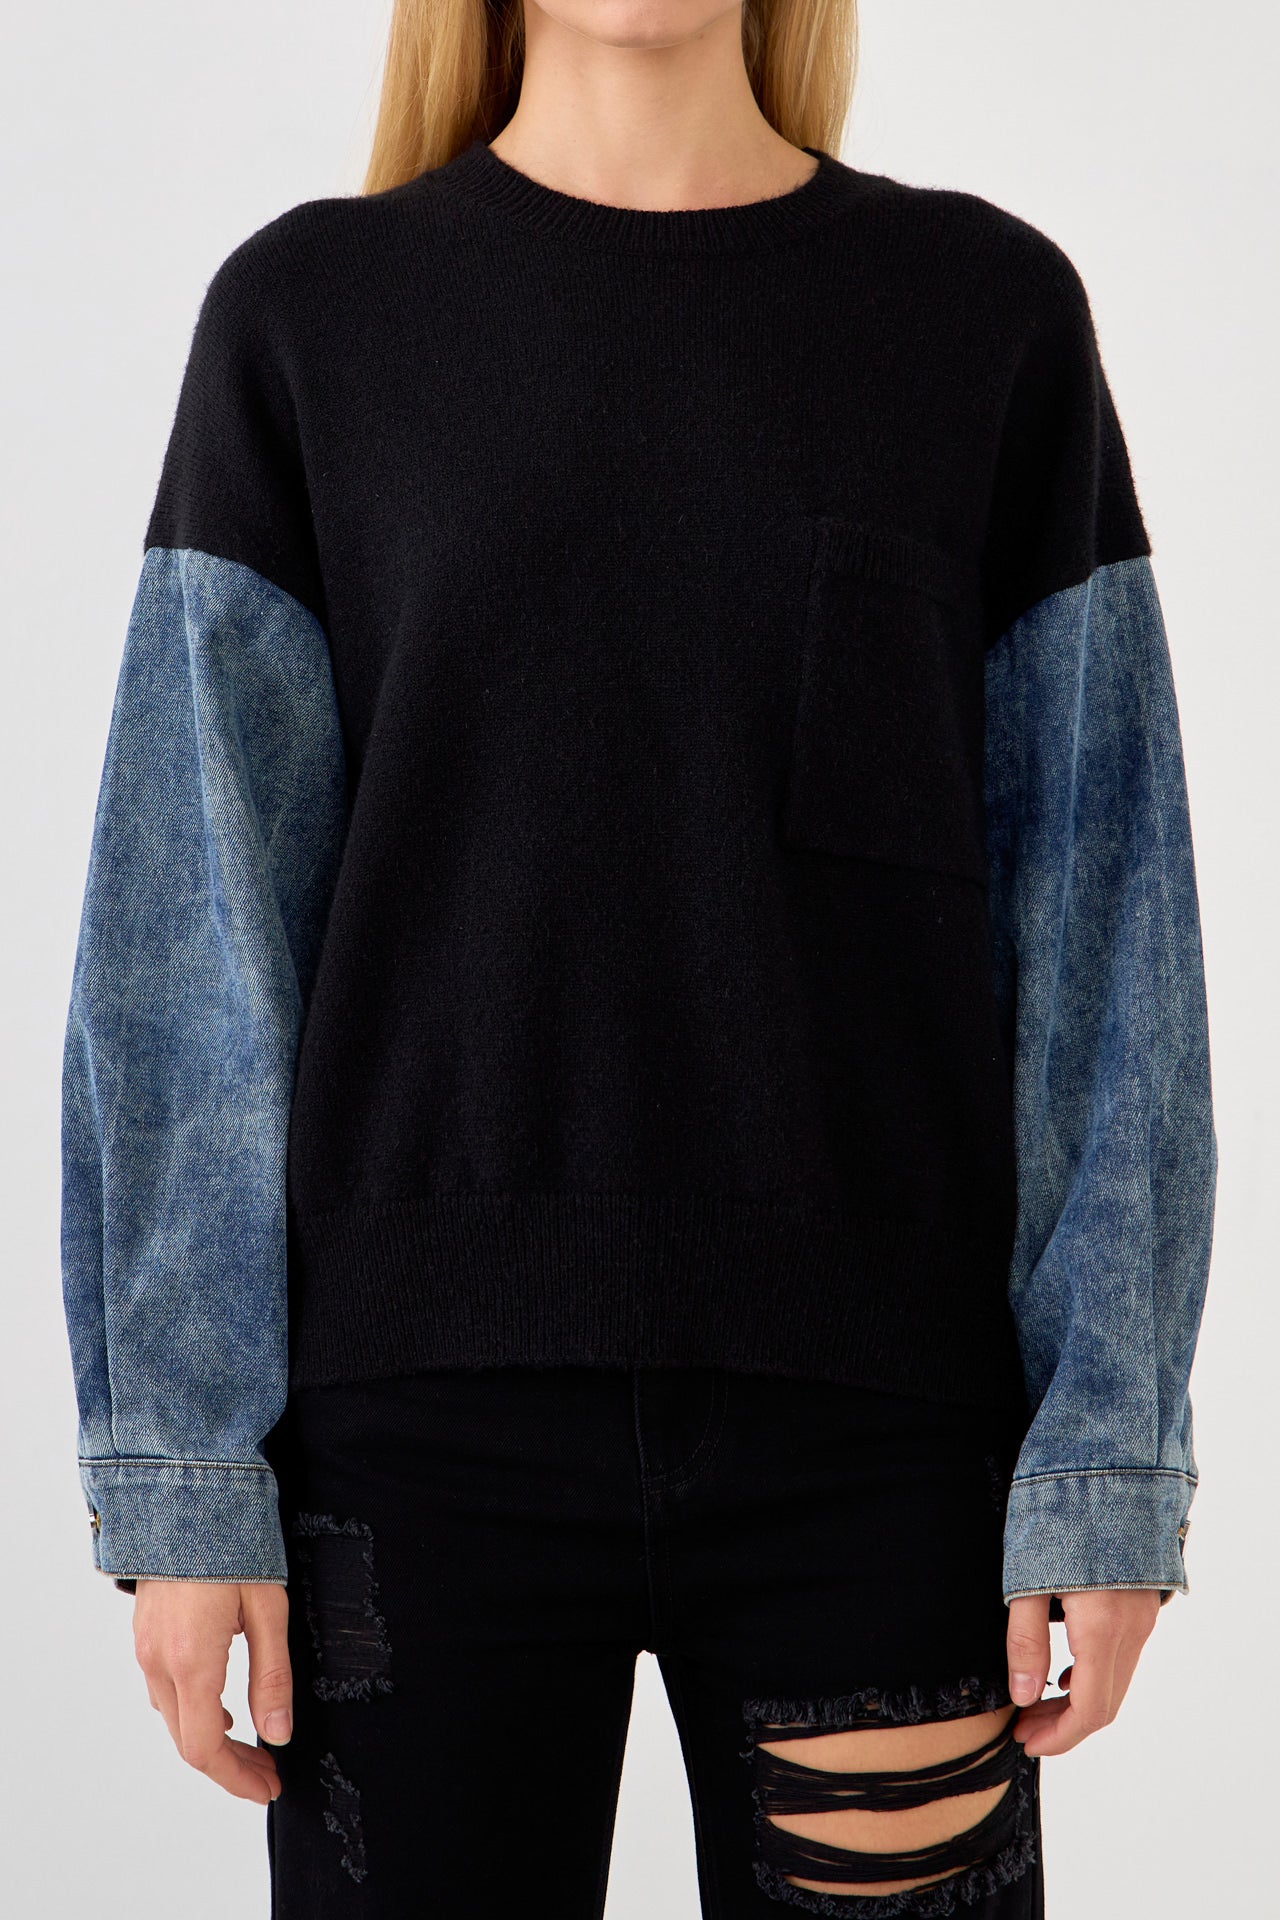 GREY LAB - Denim Combo Sleeve Sweater - SWEATERS & KNITS available at Objectrare